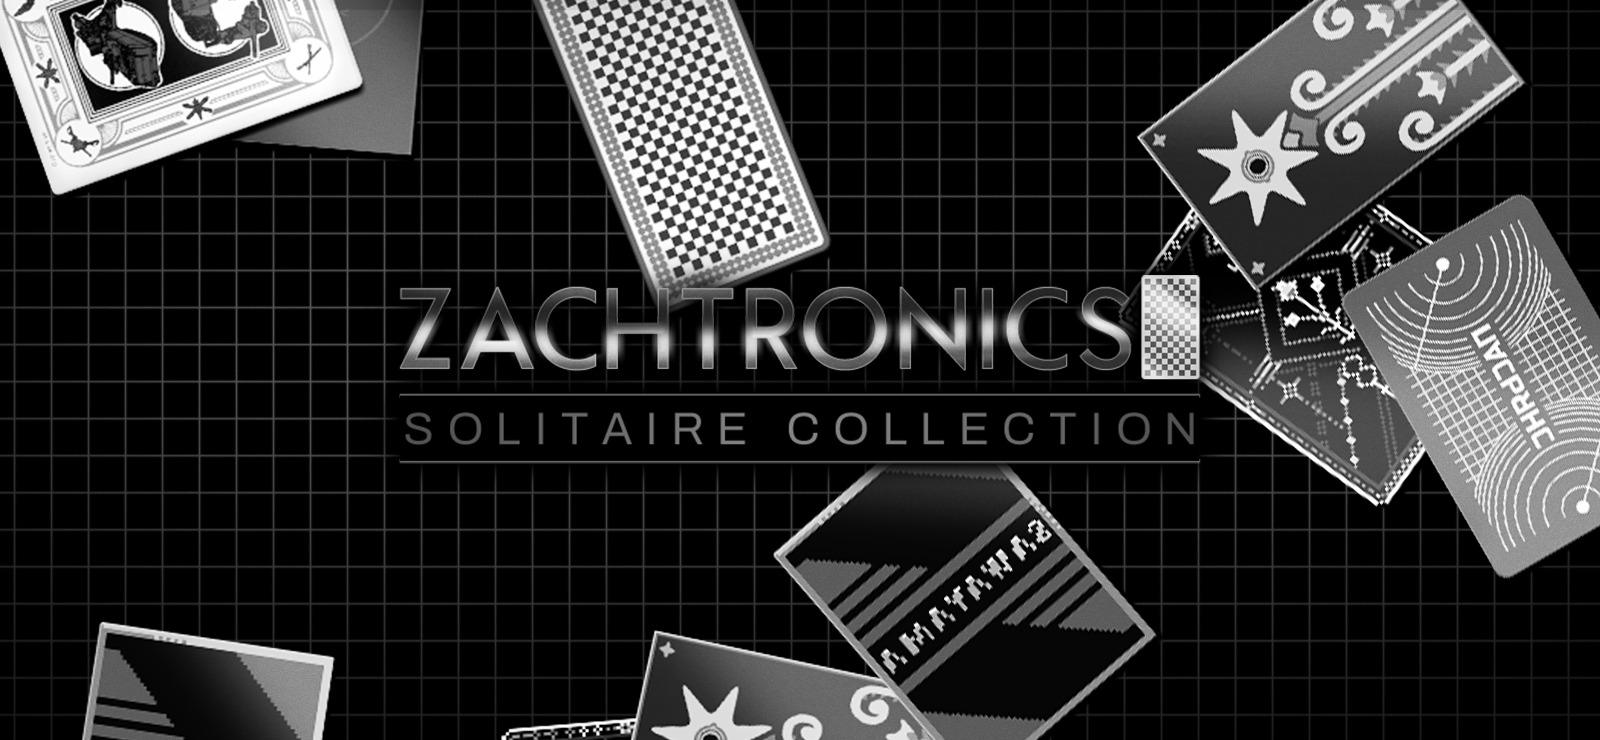 Zachtronics on X: What's in the Zachtronics Solitaire Collection